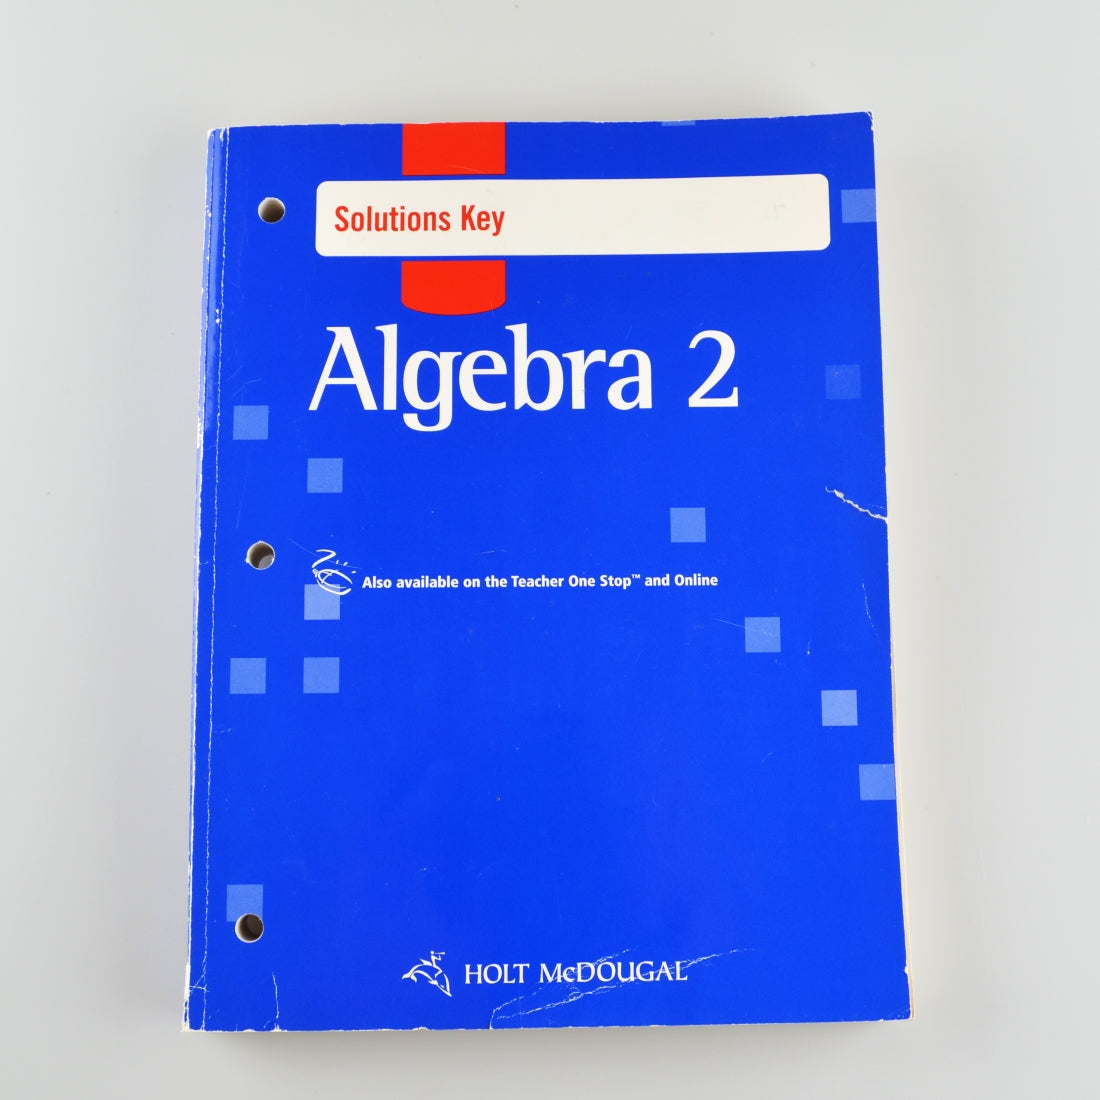 Holt McDougal Algebra 2 Solutions Key - Worked Out Solutions 2011